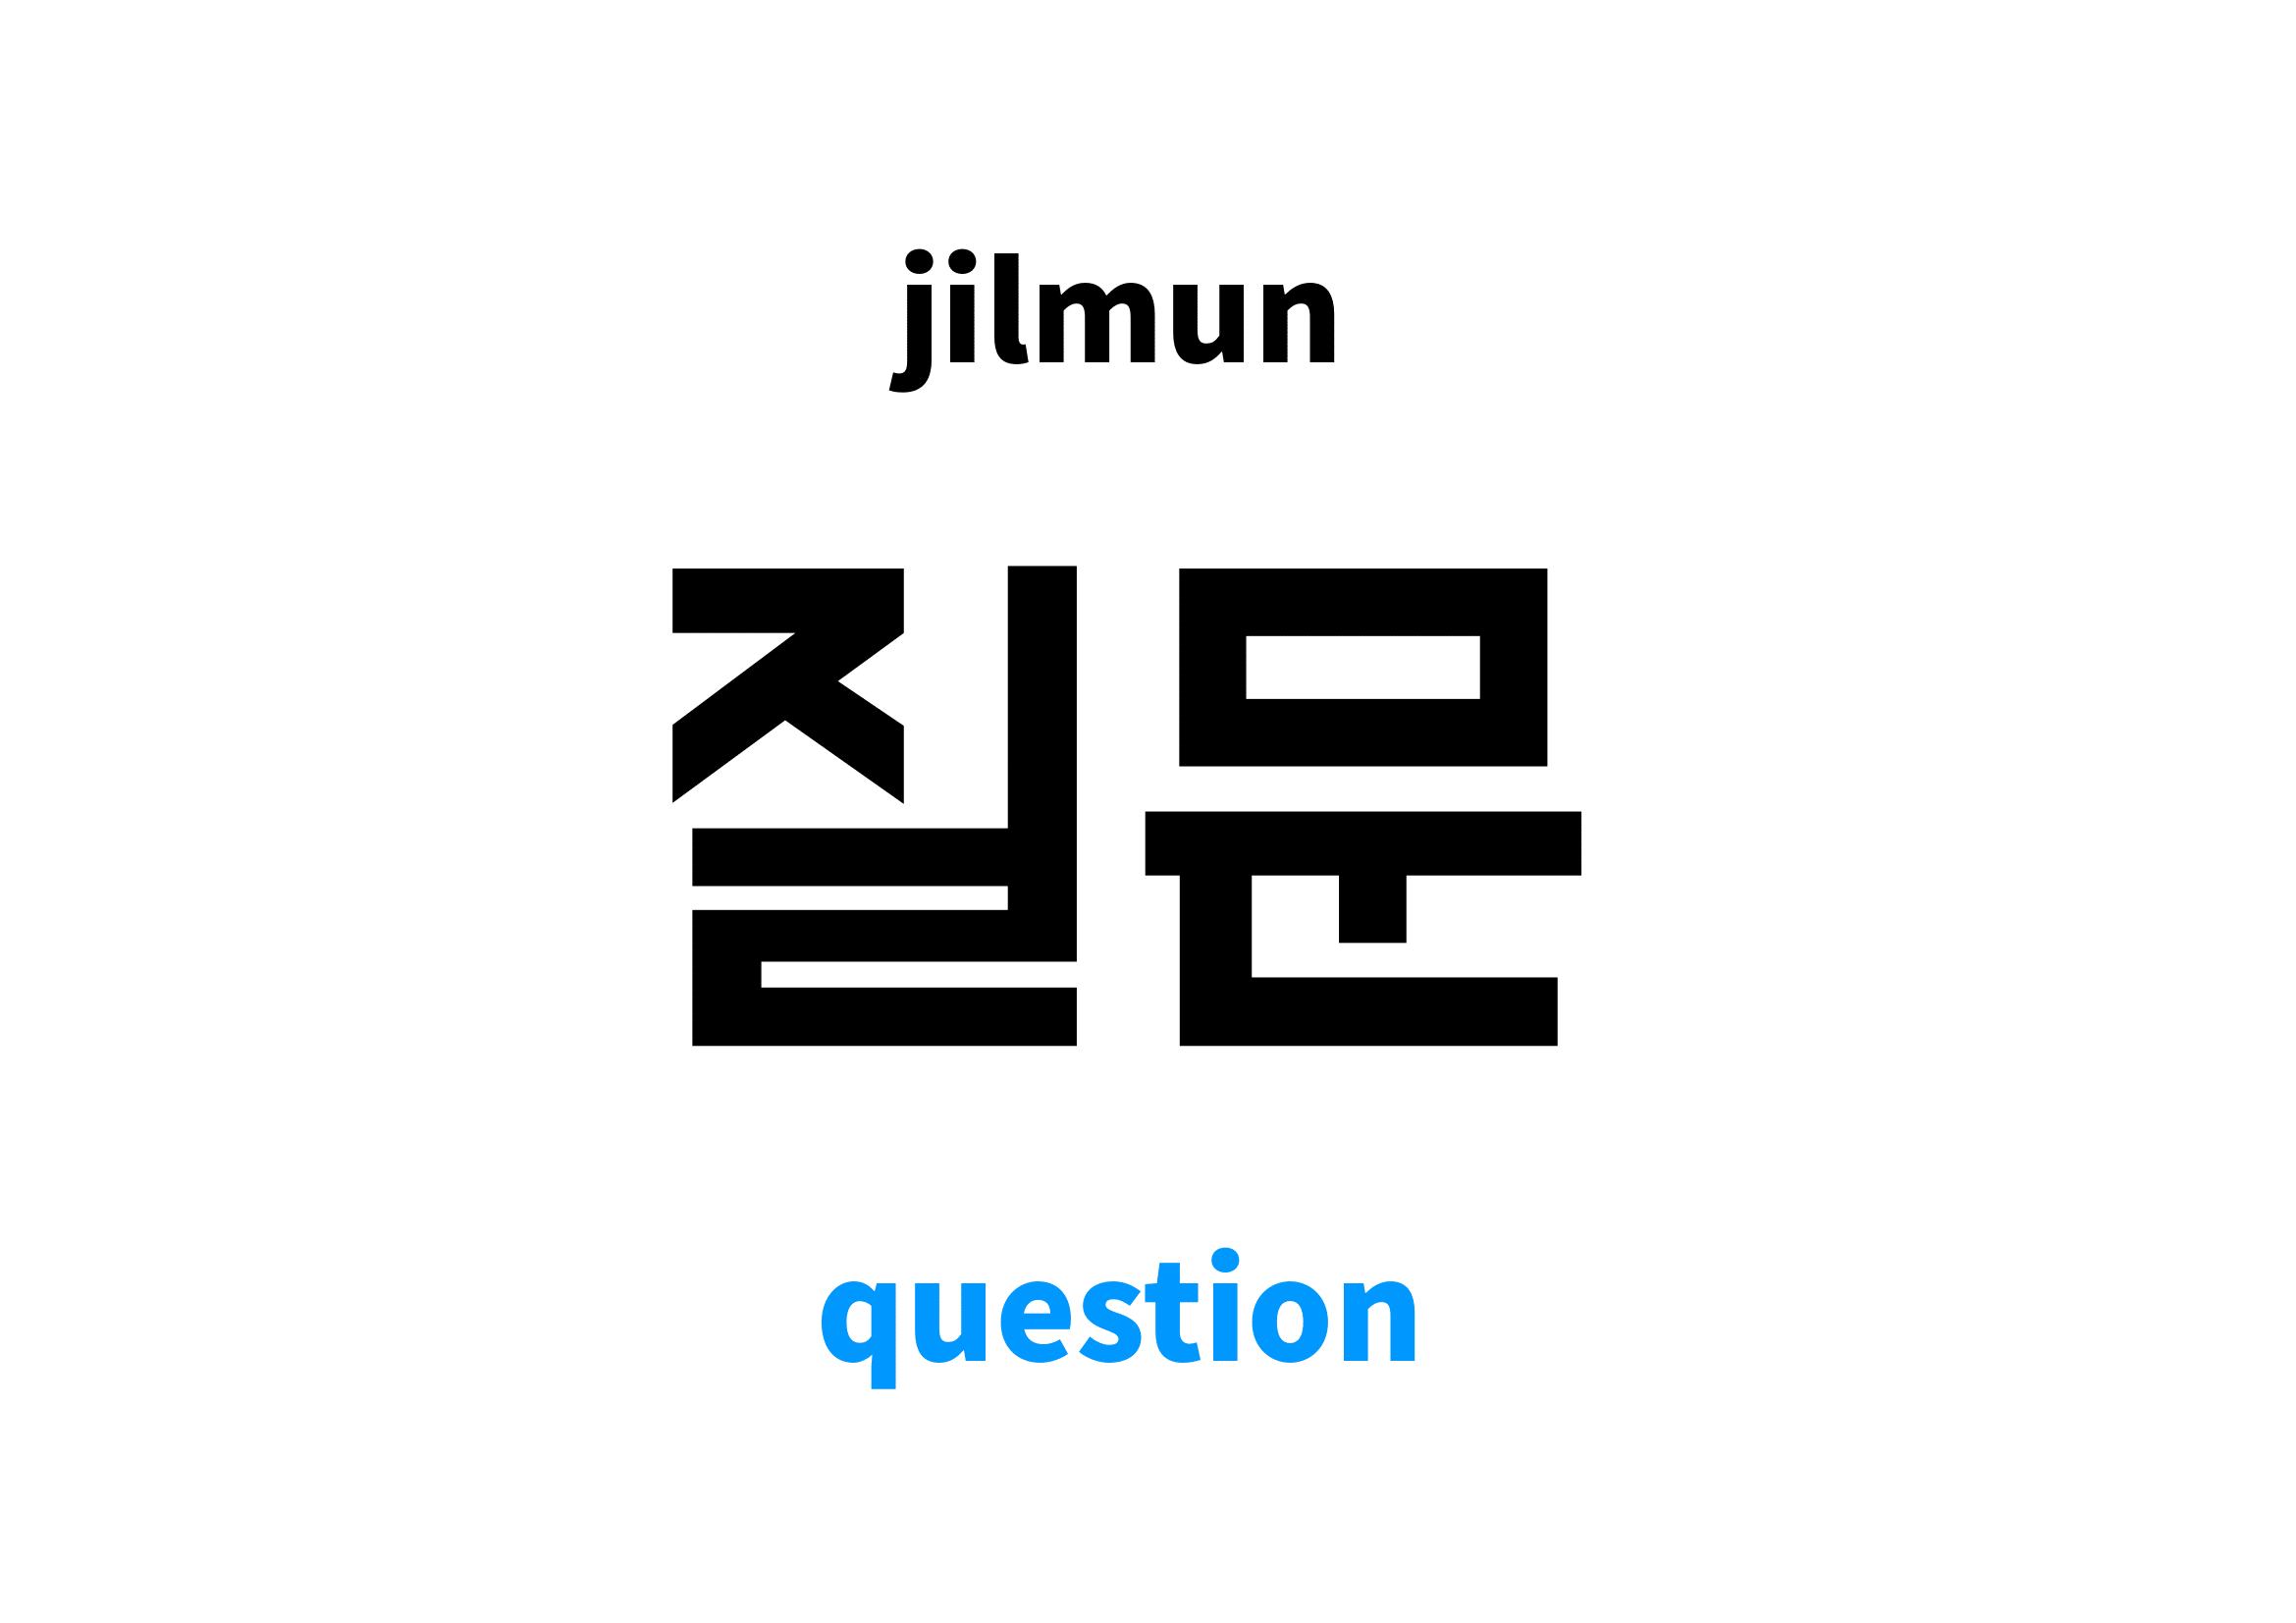 Question in Korean, 질문 meaning